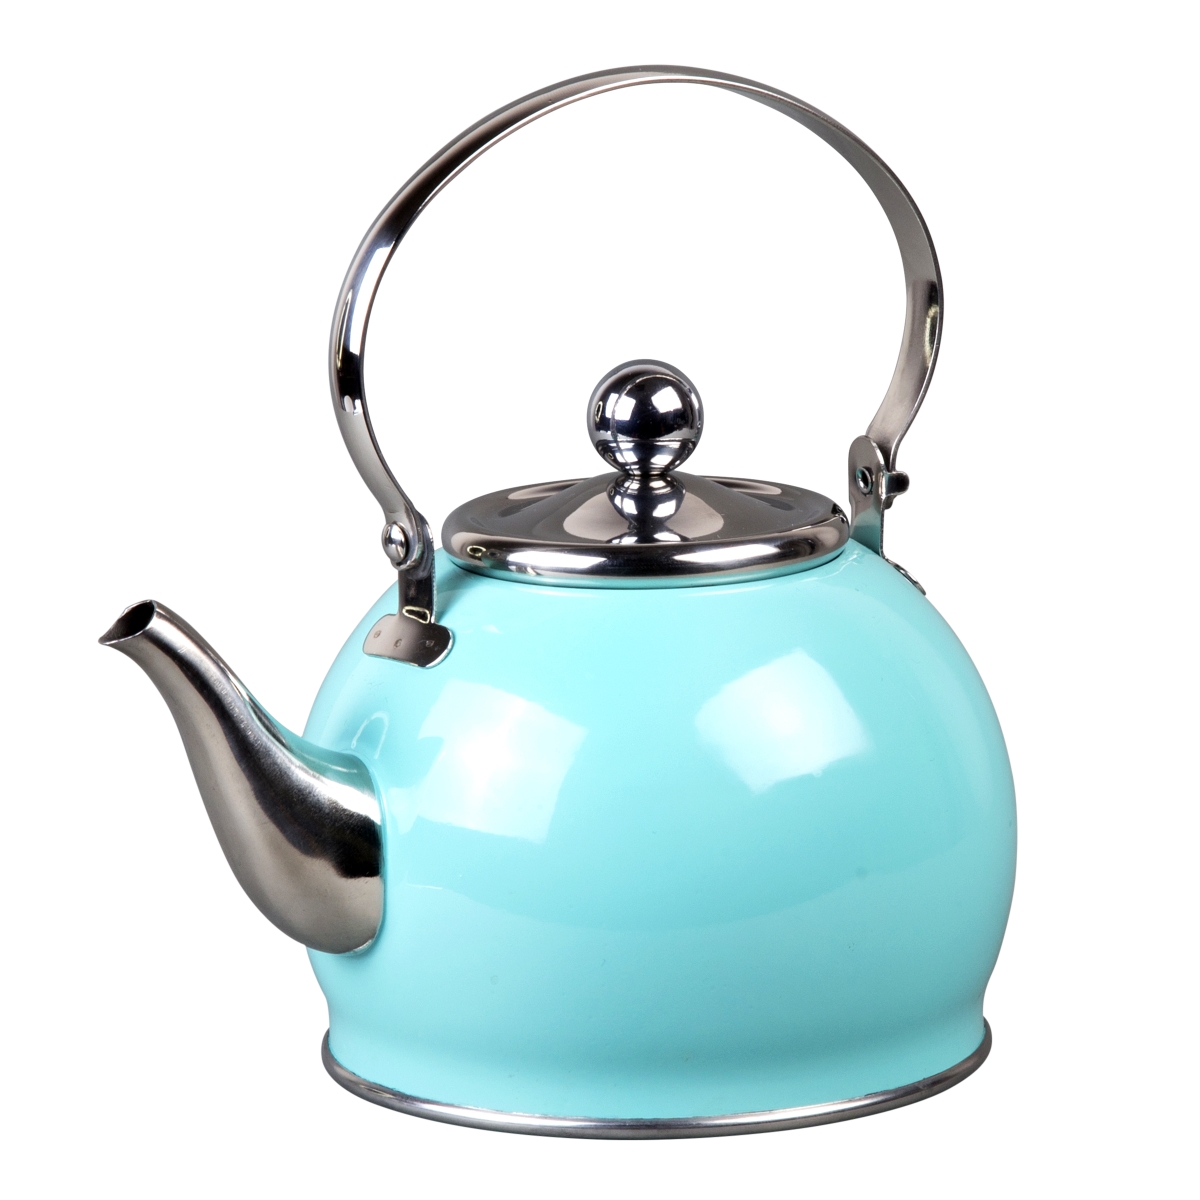 77097 1 Qt. Royal Stainless Steel Tea Kettle With Removable Infuser Basket & Folding Handle - Aqua Sky